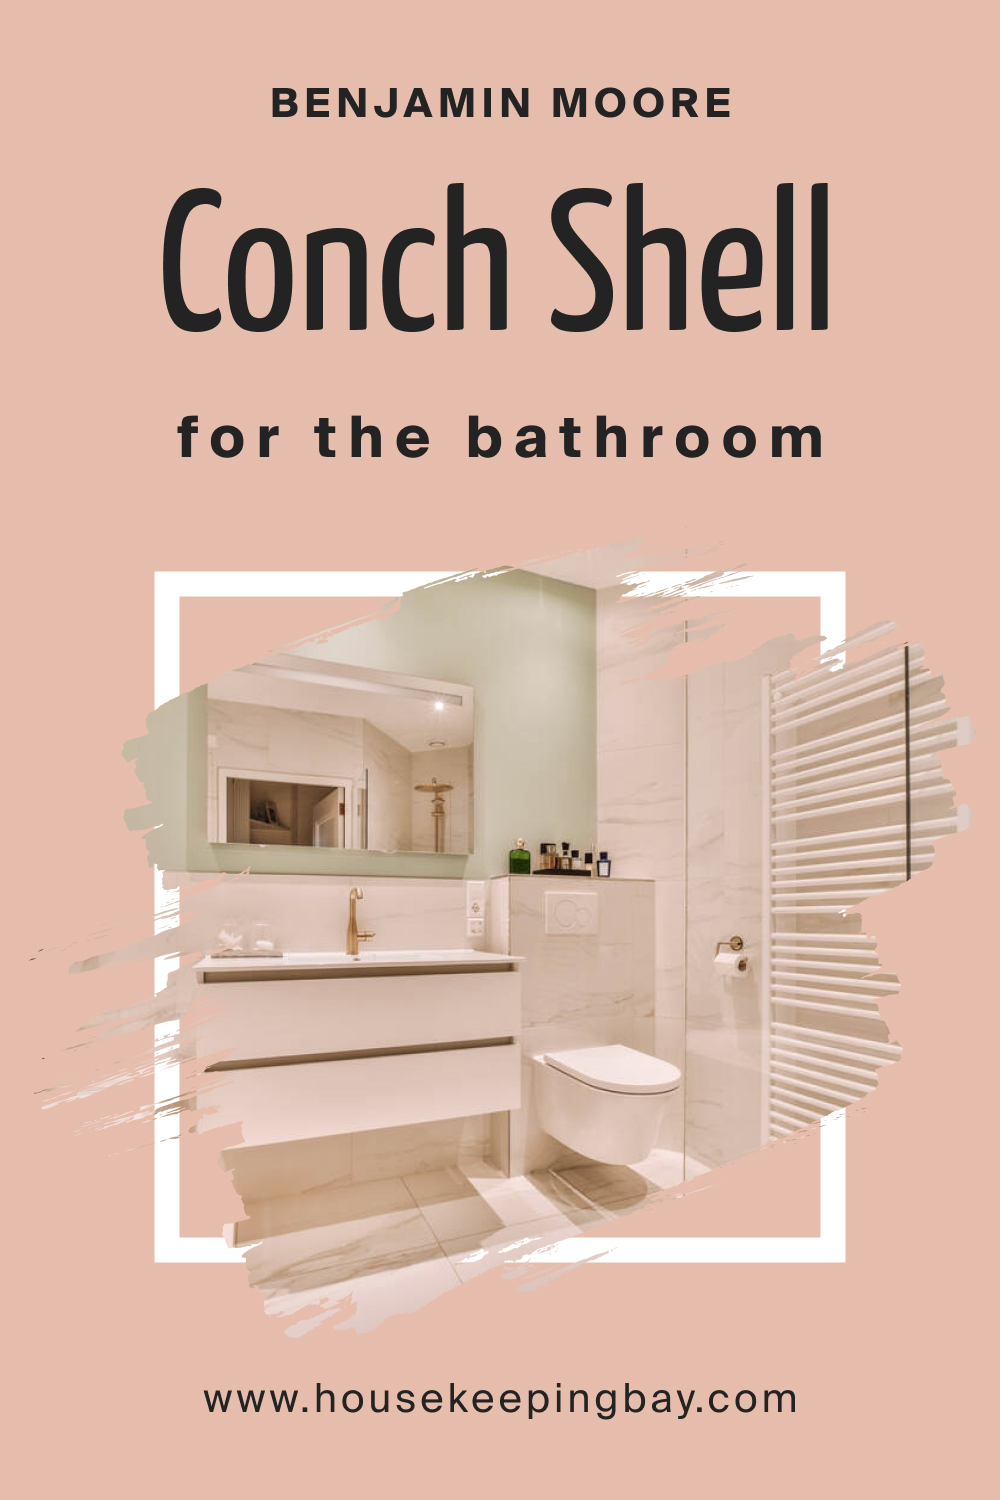 Benjamin Moore. Conch Shell 052 for the Bathroom